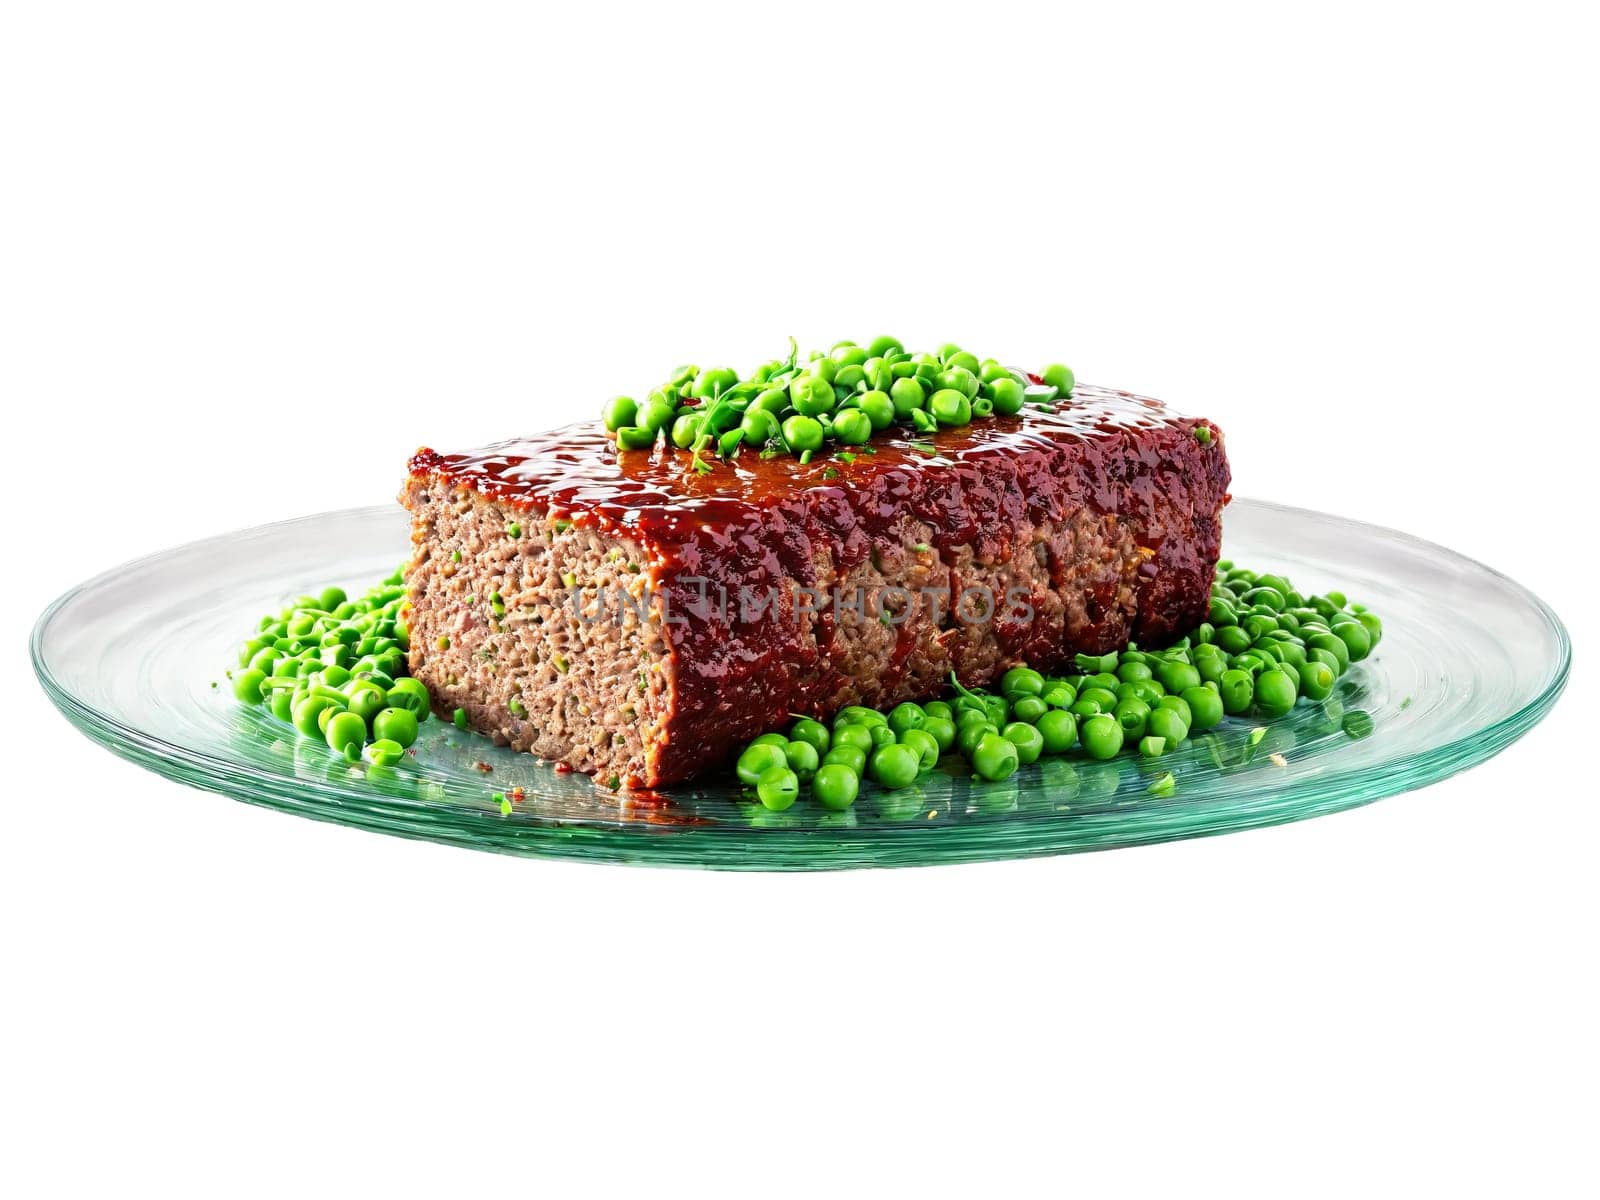 Meatloaf glazed and sliced with green peas on the side on a transparent glass plate. Food isolated on transparent background.